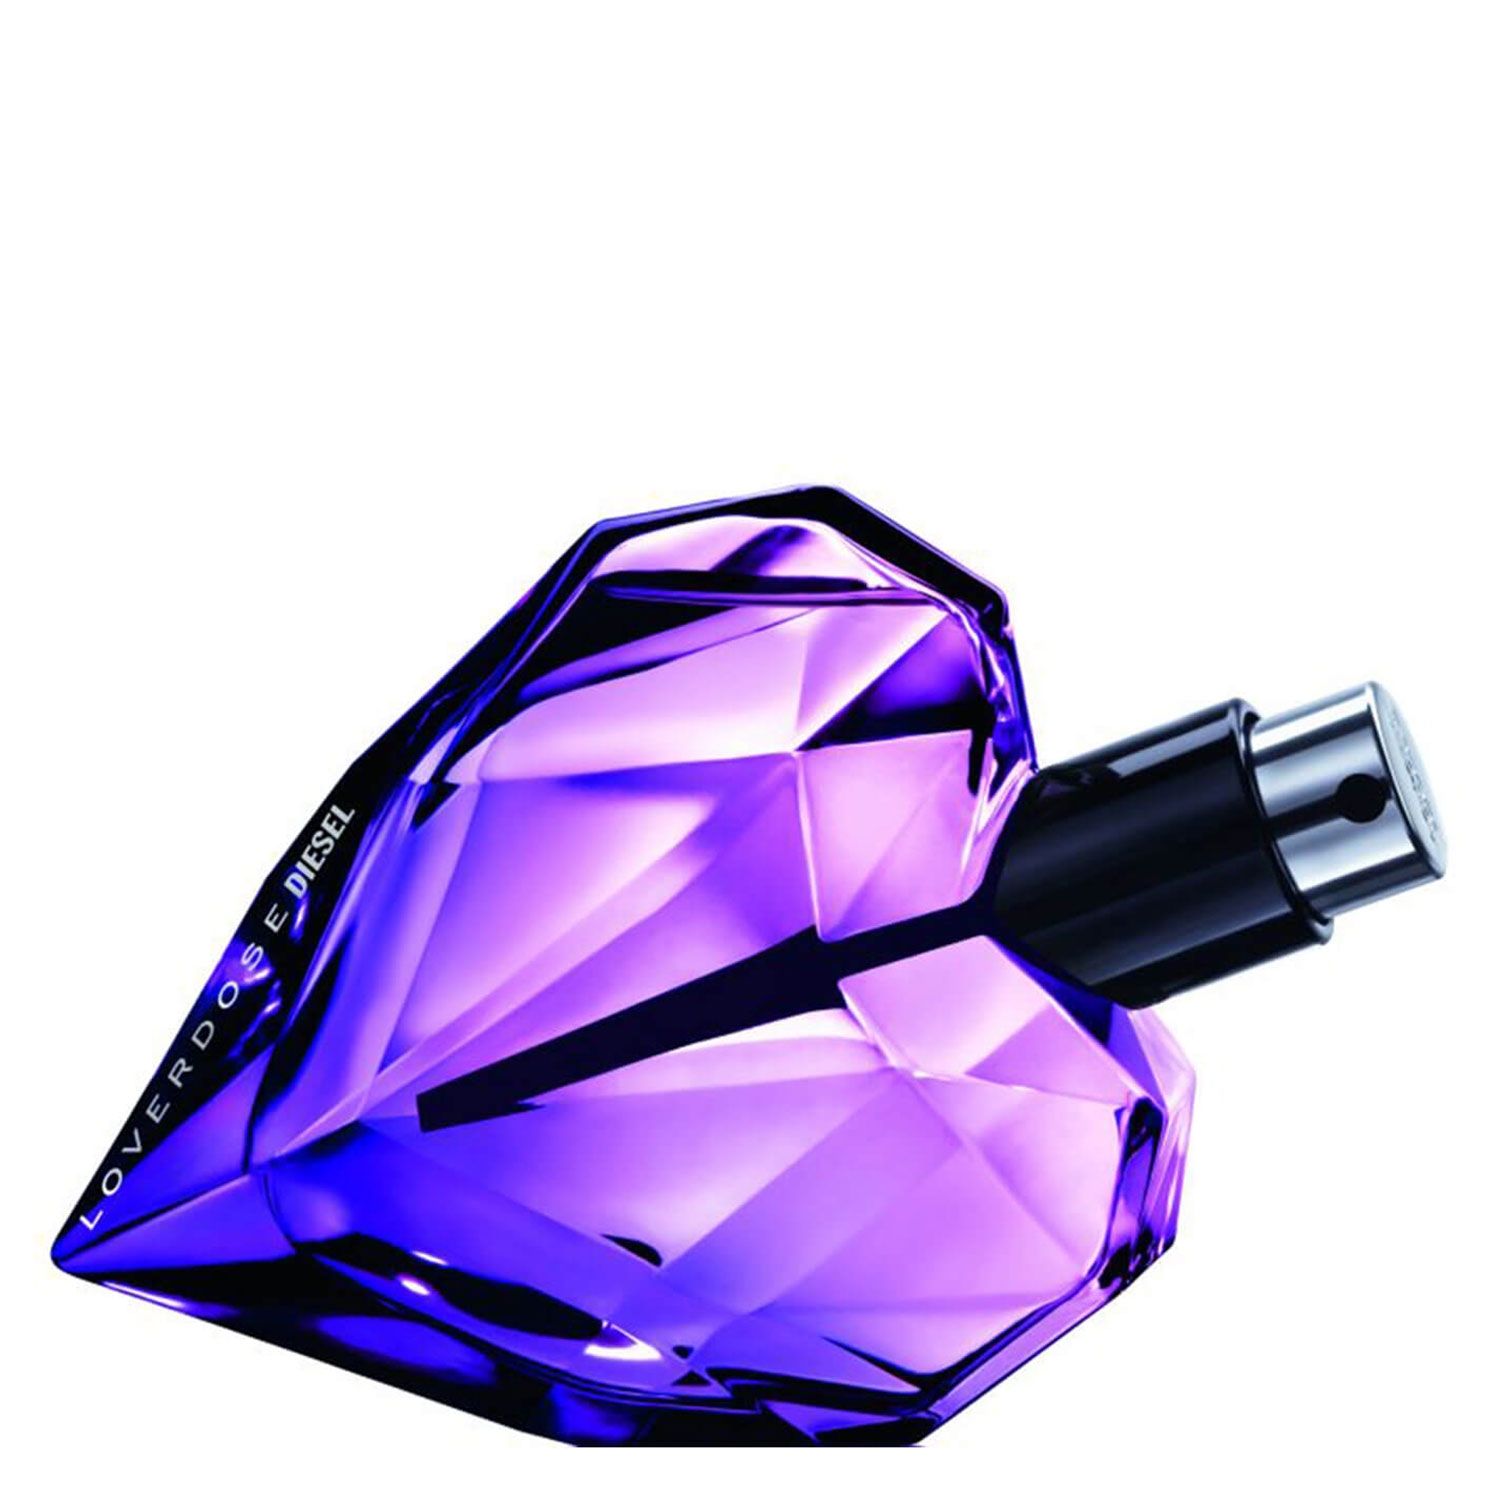 Product image from Loverdose - Loverdose EdP